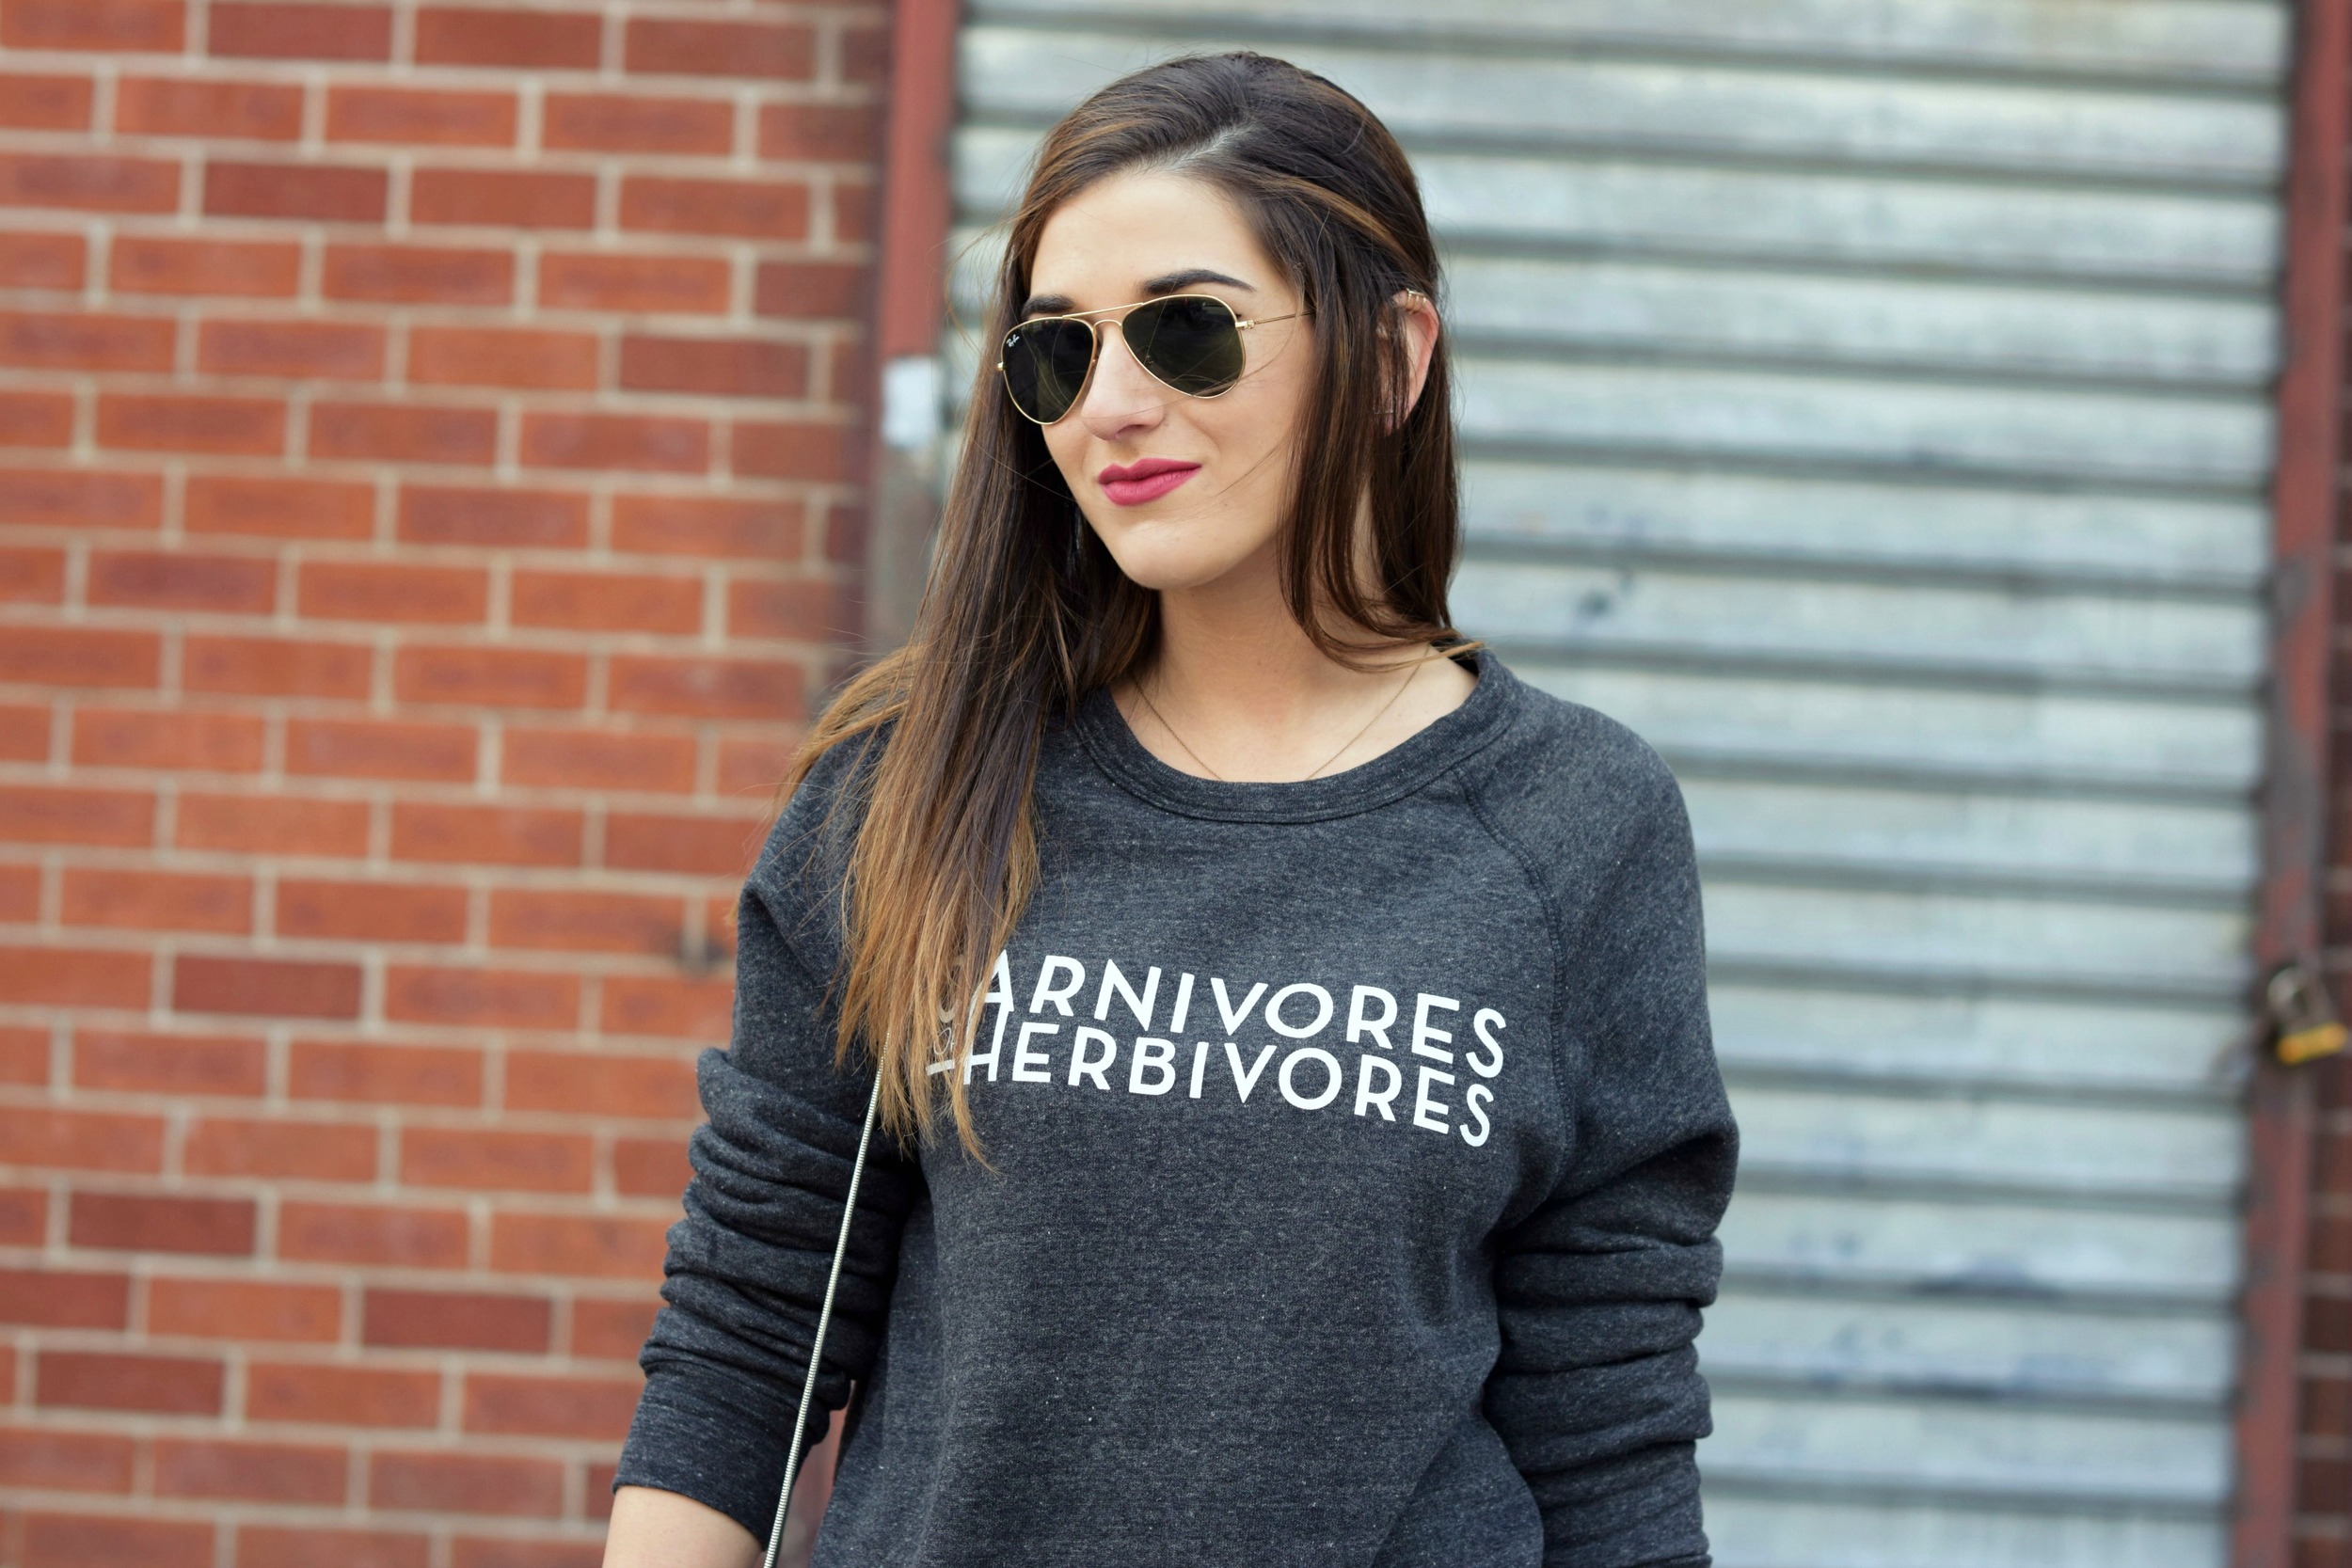 Carnivores For Herbivores Fauxgerty Louboutins & Love Fashion Blog Esther Santer NYC Street Style Blogger Animal Lover Cruelty Free Suede Vegan Leather RayBan Aviators Sunglasses Grey Sweatshirt Girl Women Lace Skirt Outfit OOTD Shop USA Outerwear.jpg